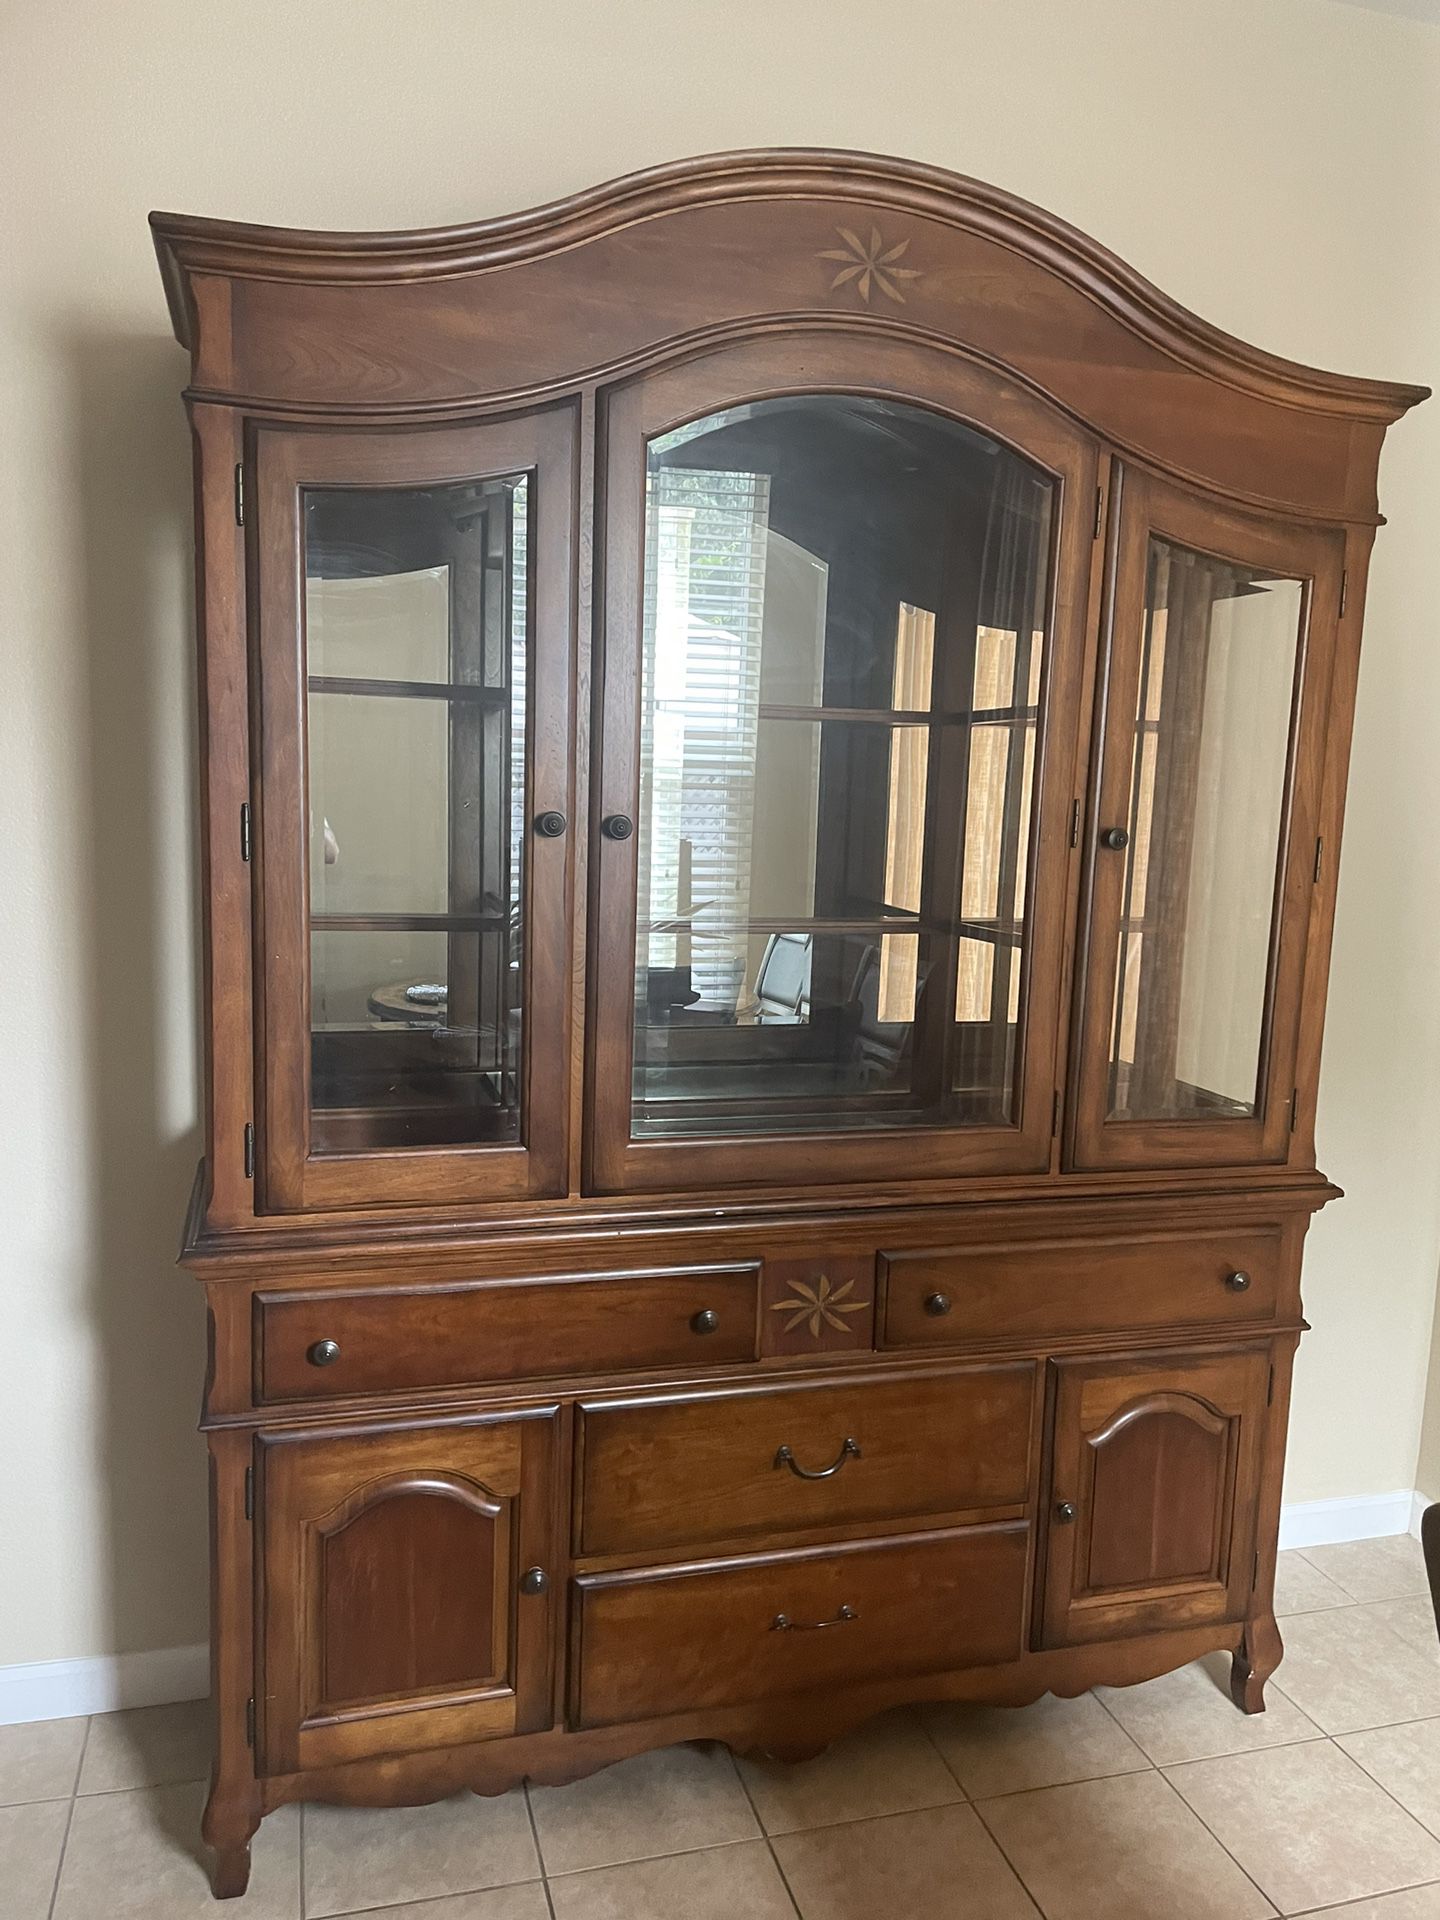 Antique 2 Piece Lane China Cabinet with Sideboard Buffet Table